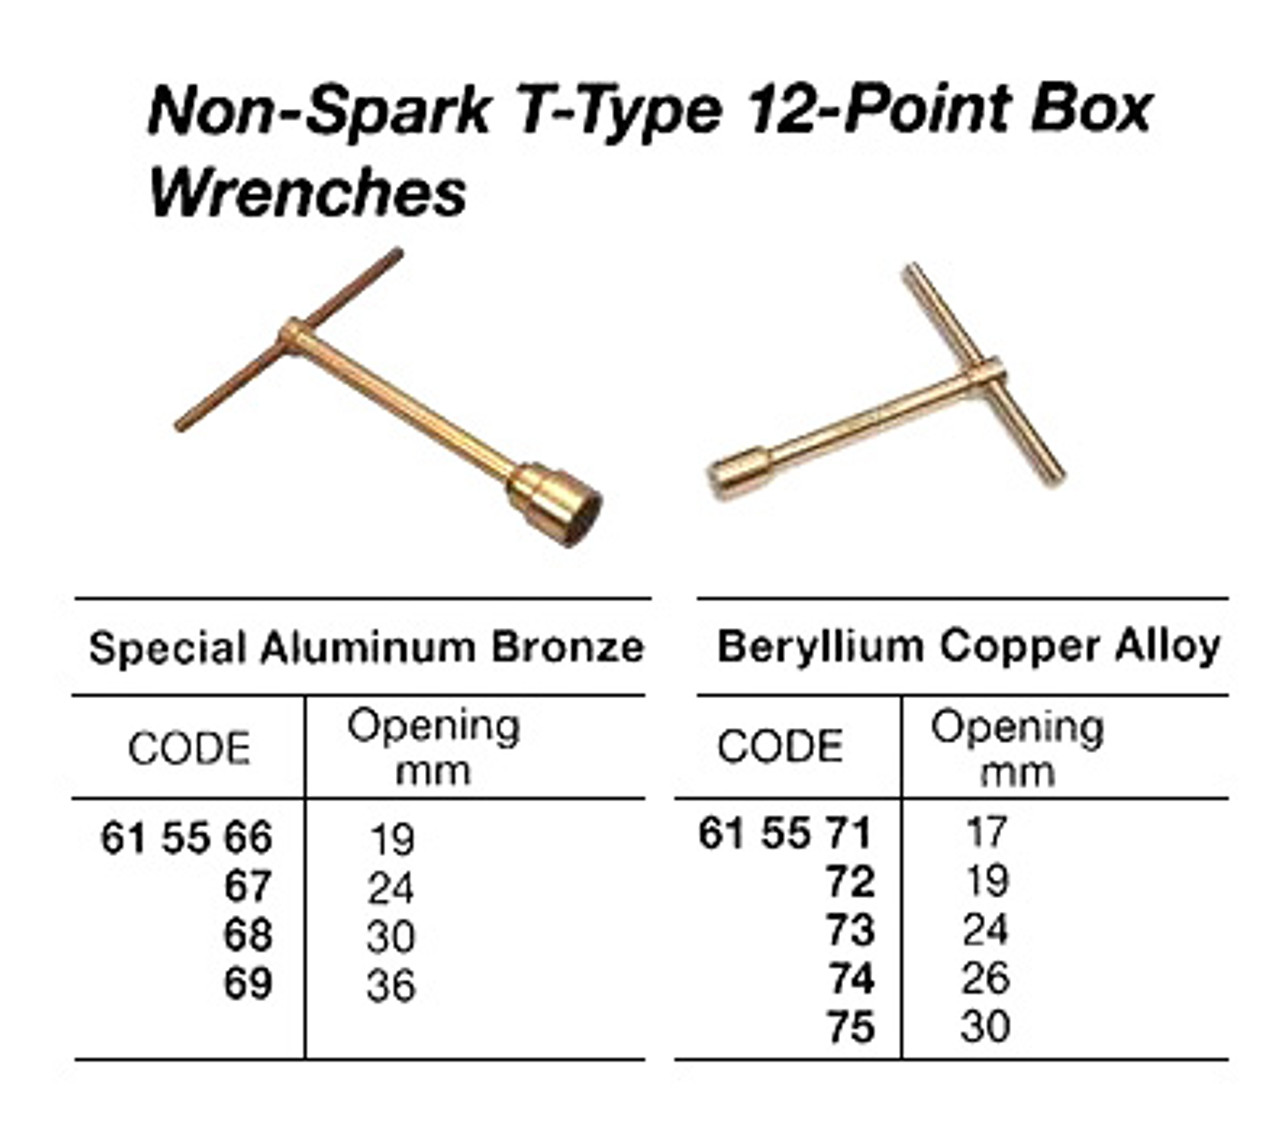 IMPA 615575 WRENCH SOCKET WITH T-HANDLE 30mm BE-COPPER NON-SPARK